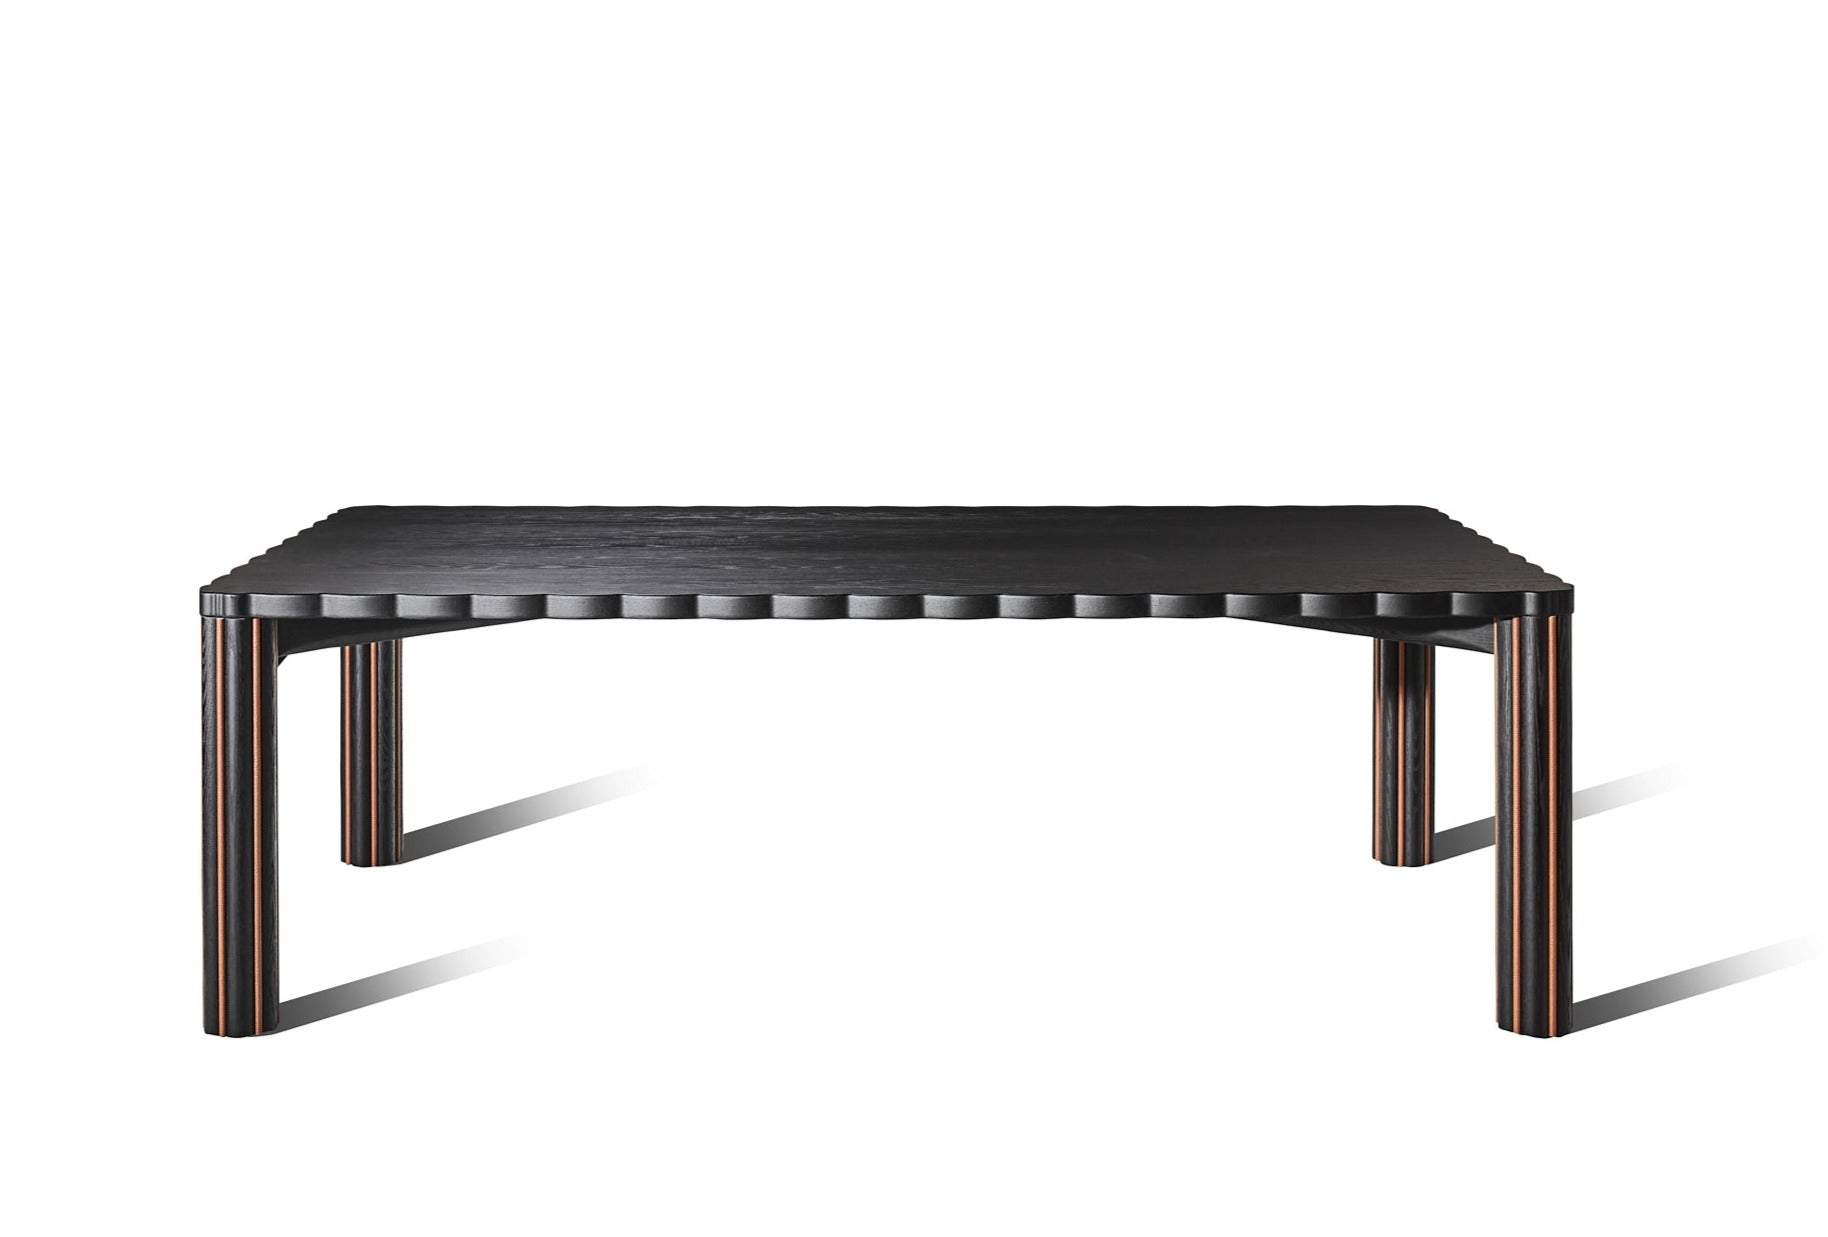 Bloom Dining Table - Mink & Tan Leather - Zuster Furniture